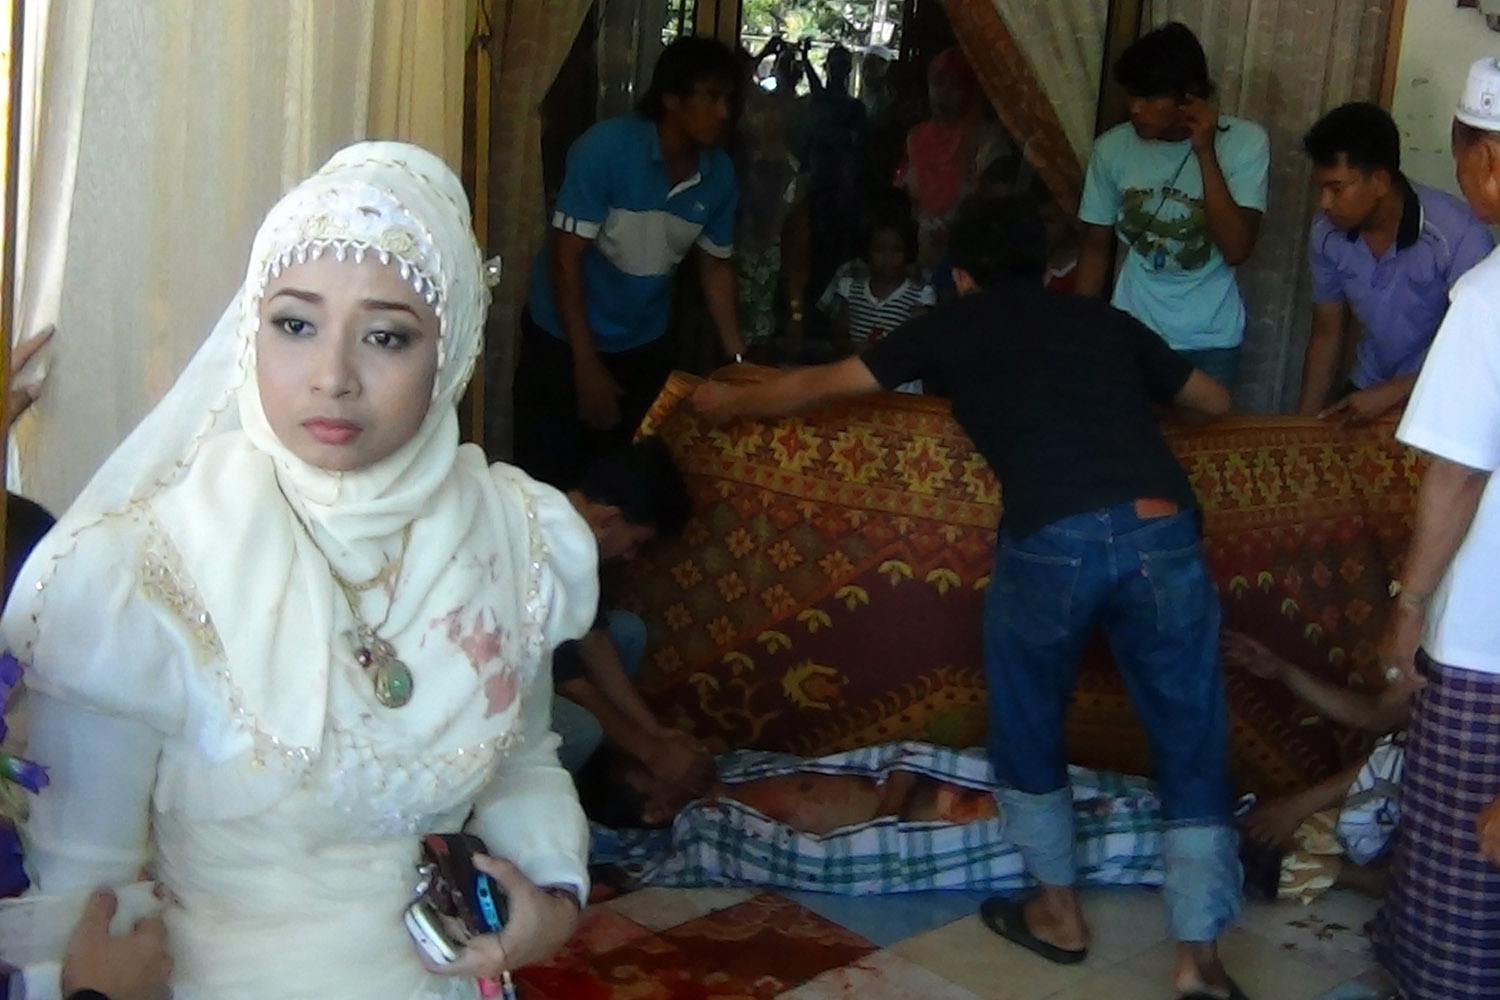 June 10, 2012. Bride Nurasatilah Masae (L) standing in front of her bridegroom who was shot dead during their wedding in the Muslim majority province of Pattani, southern Thailand.